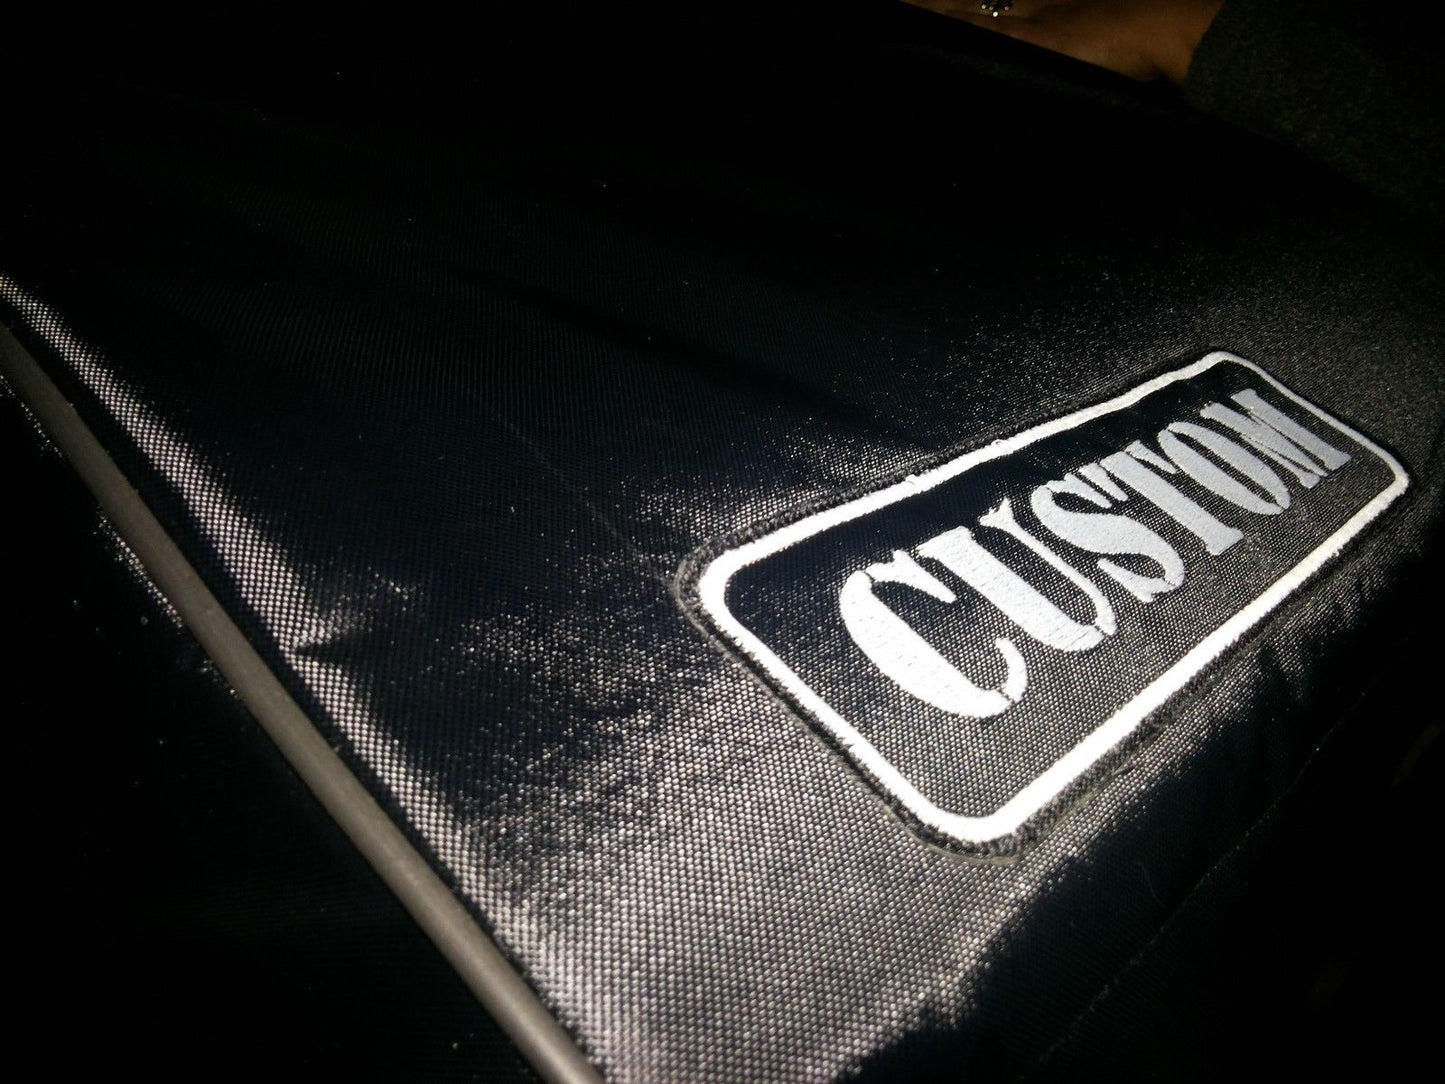 Custom padded cover for DiGiCo SD Ten mixing console